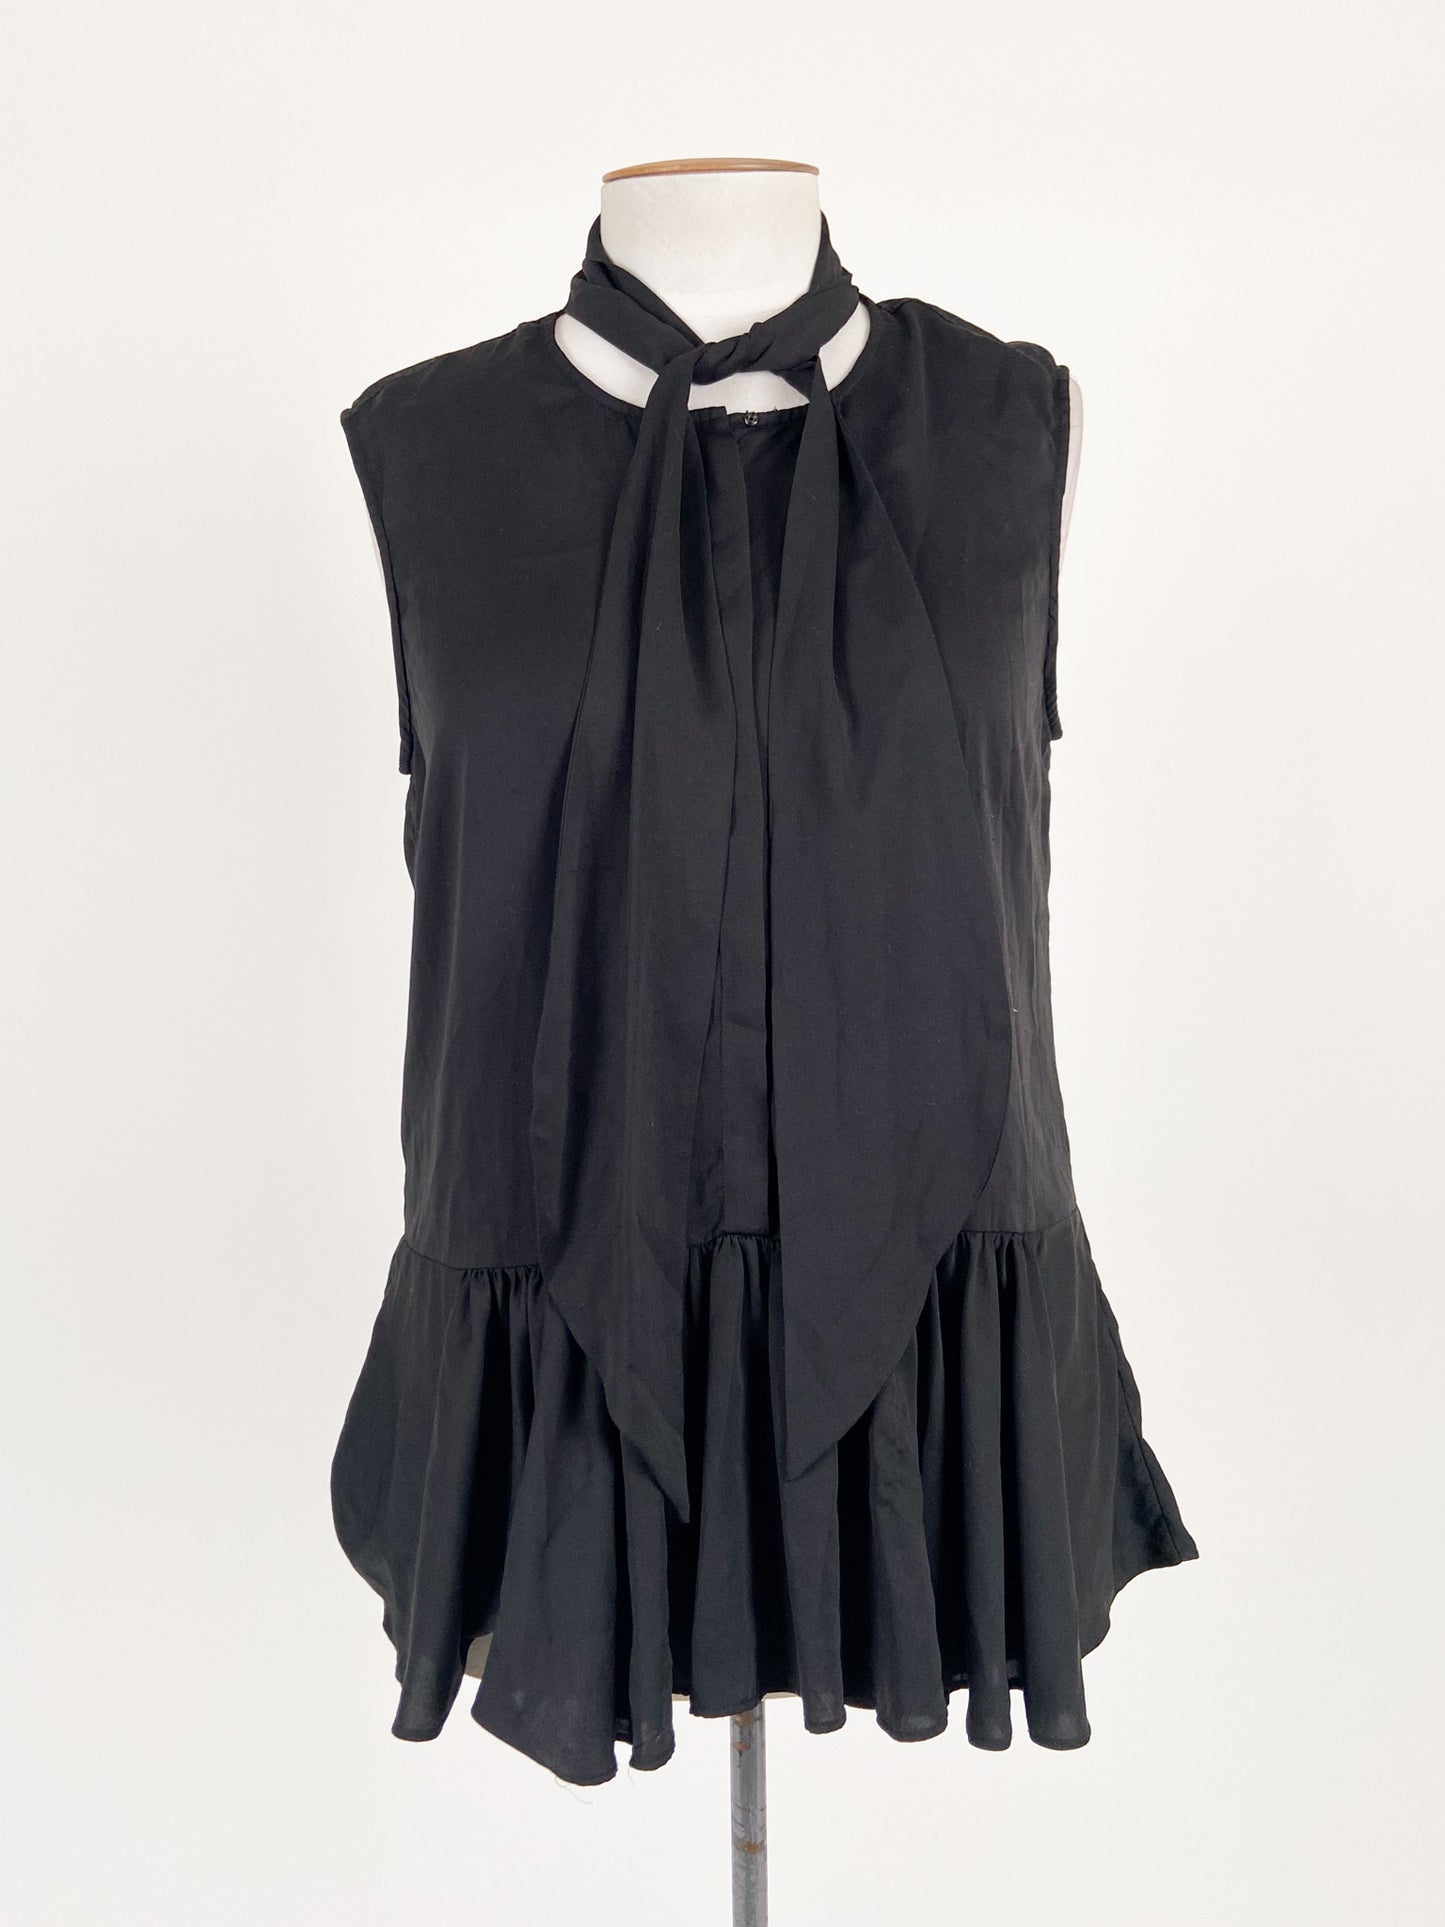 Witchery | Black Casual Top | Size 12